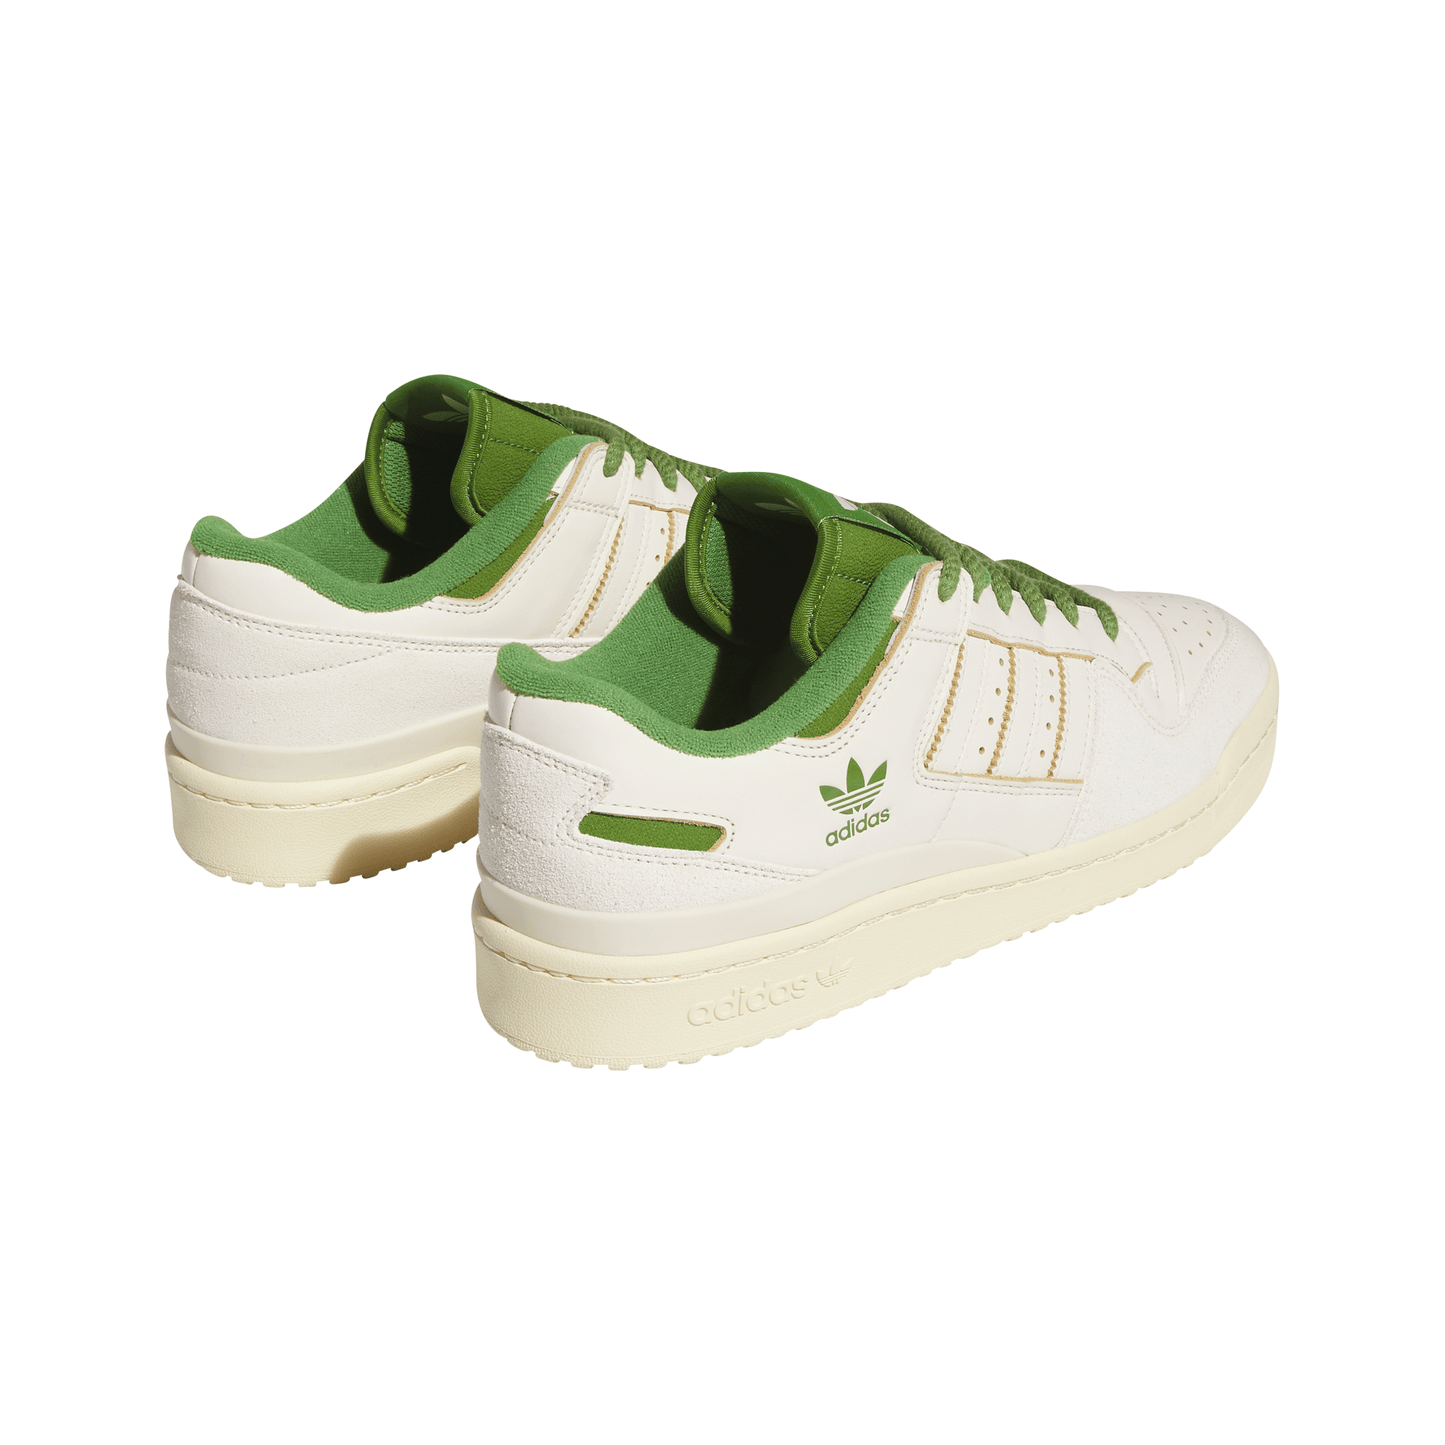 Adidas Forum 84 Low CL Off White/Green FZ6296